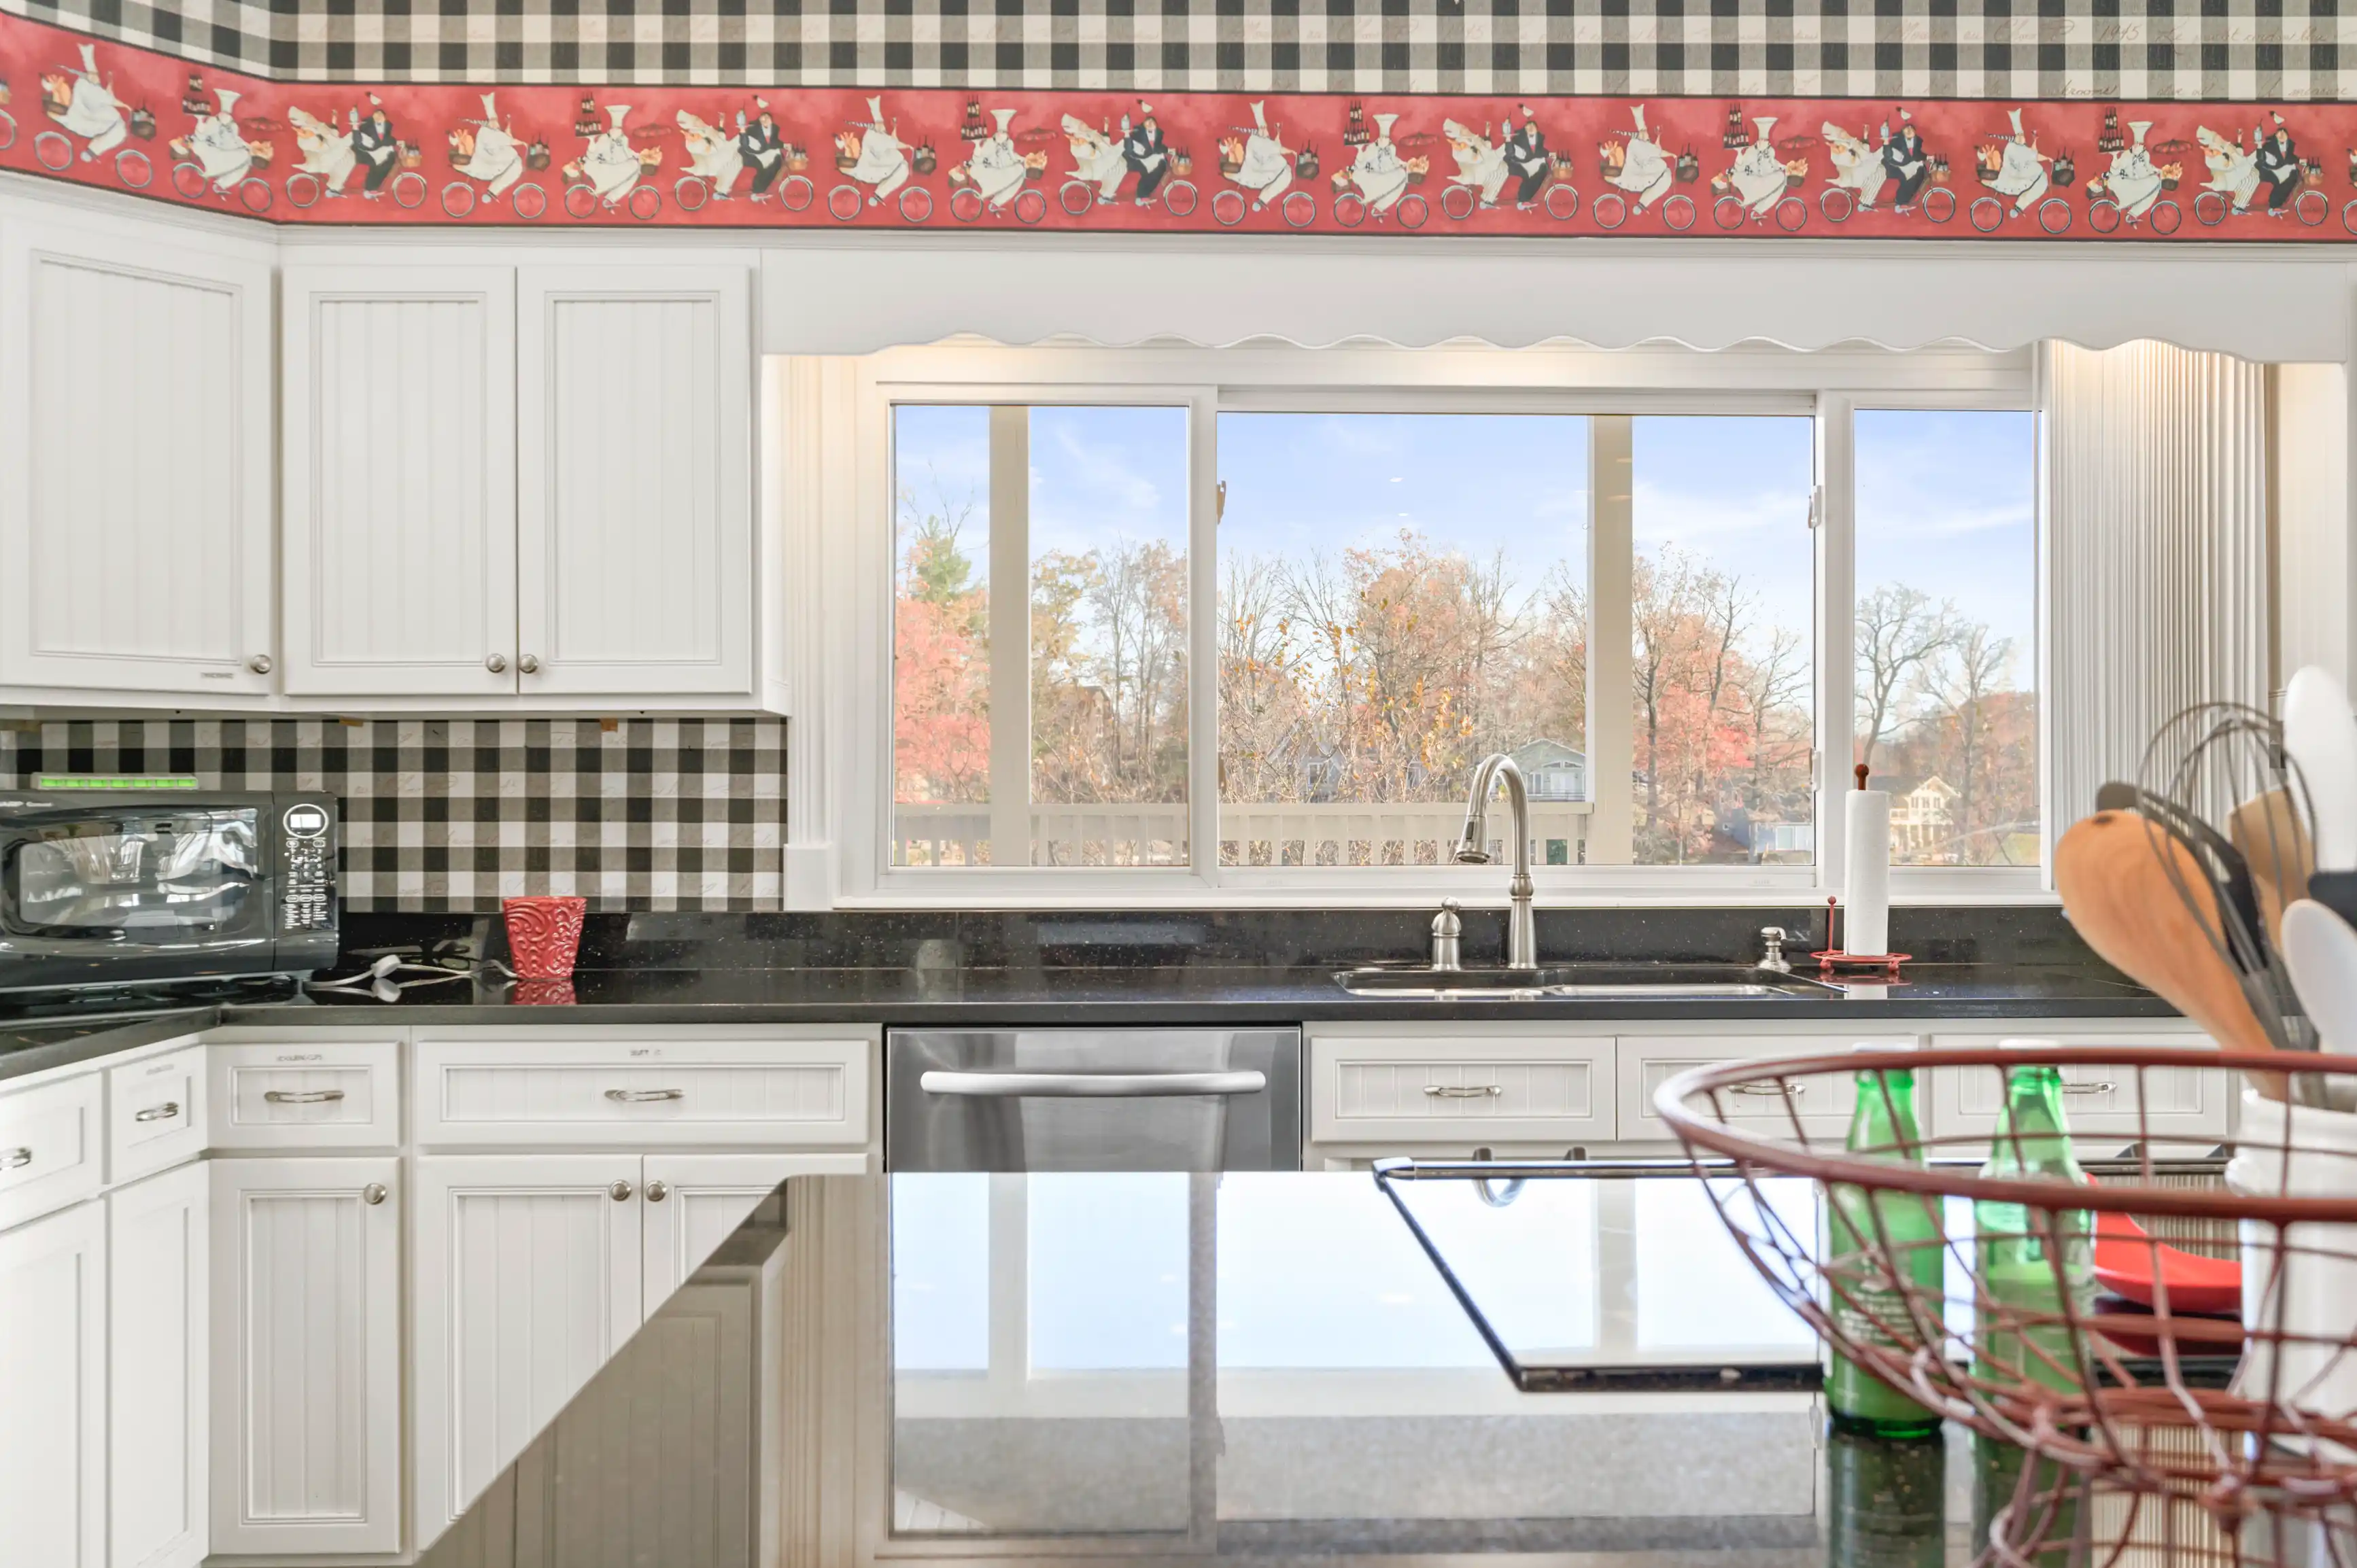 Bright kitchen interior with white cabinetry, black countertops, checkered backsplash, and a picturesque window view with autumn foliage.